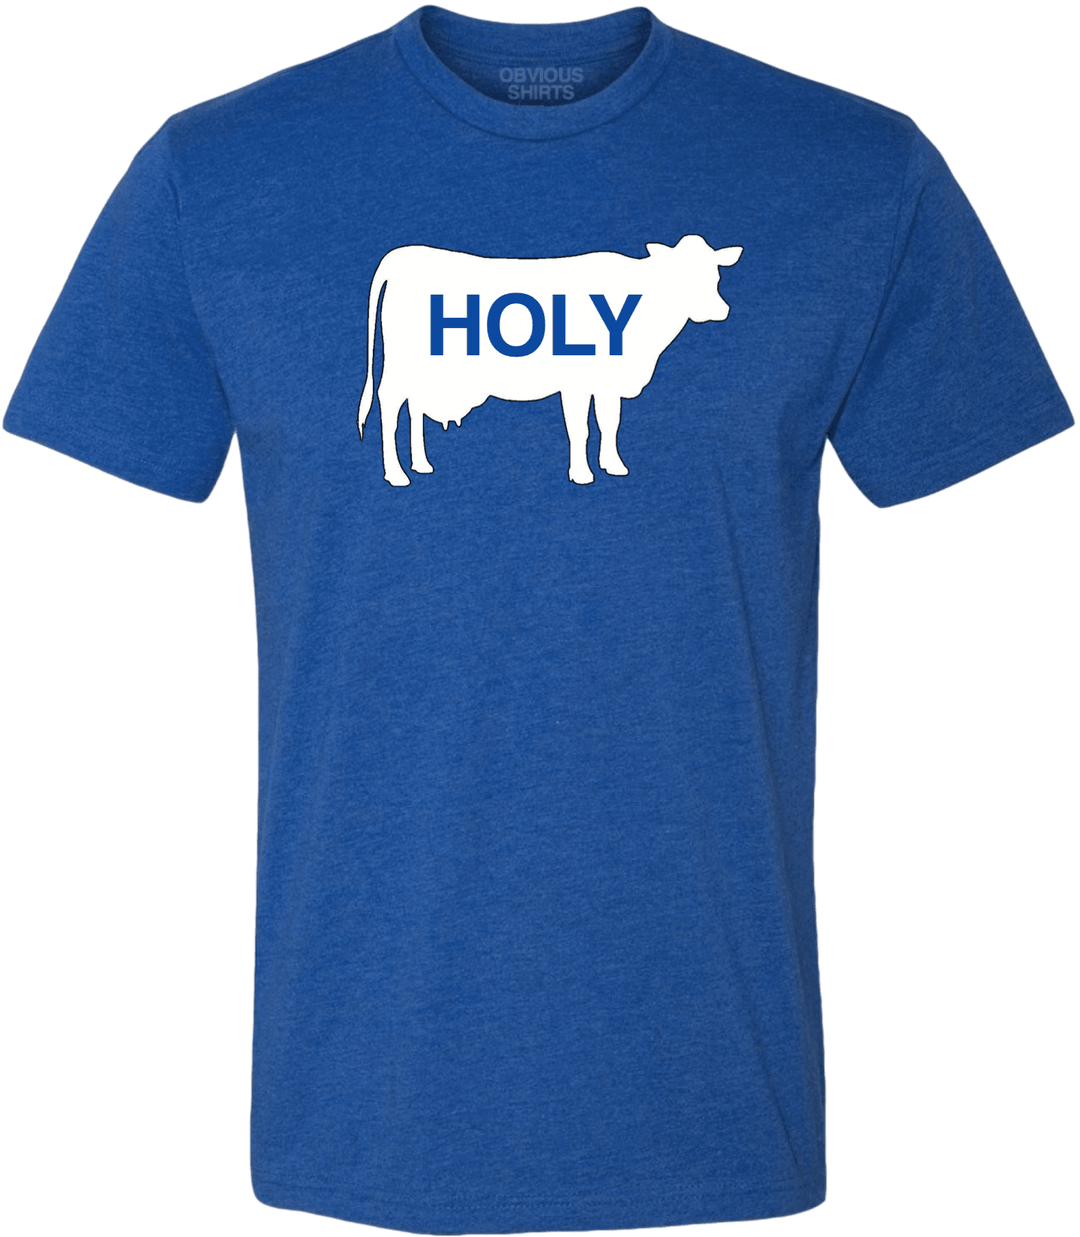 HOLY COW. - OBVIOUS SHIRTS.